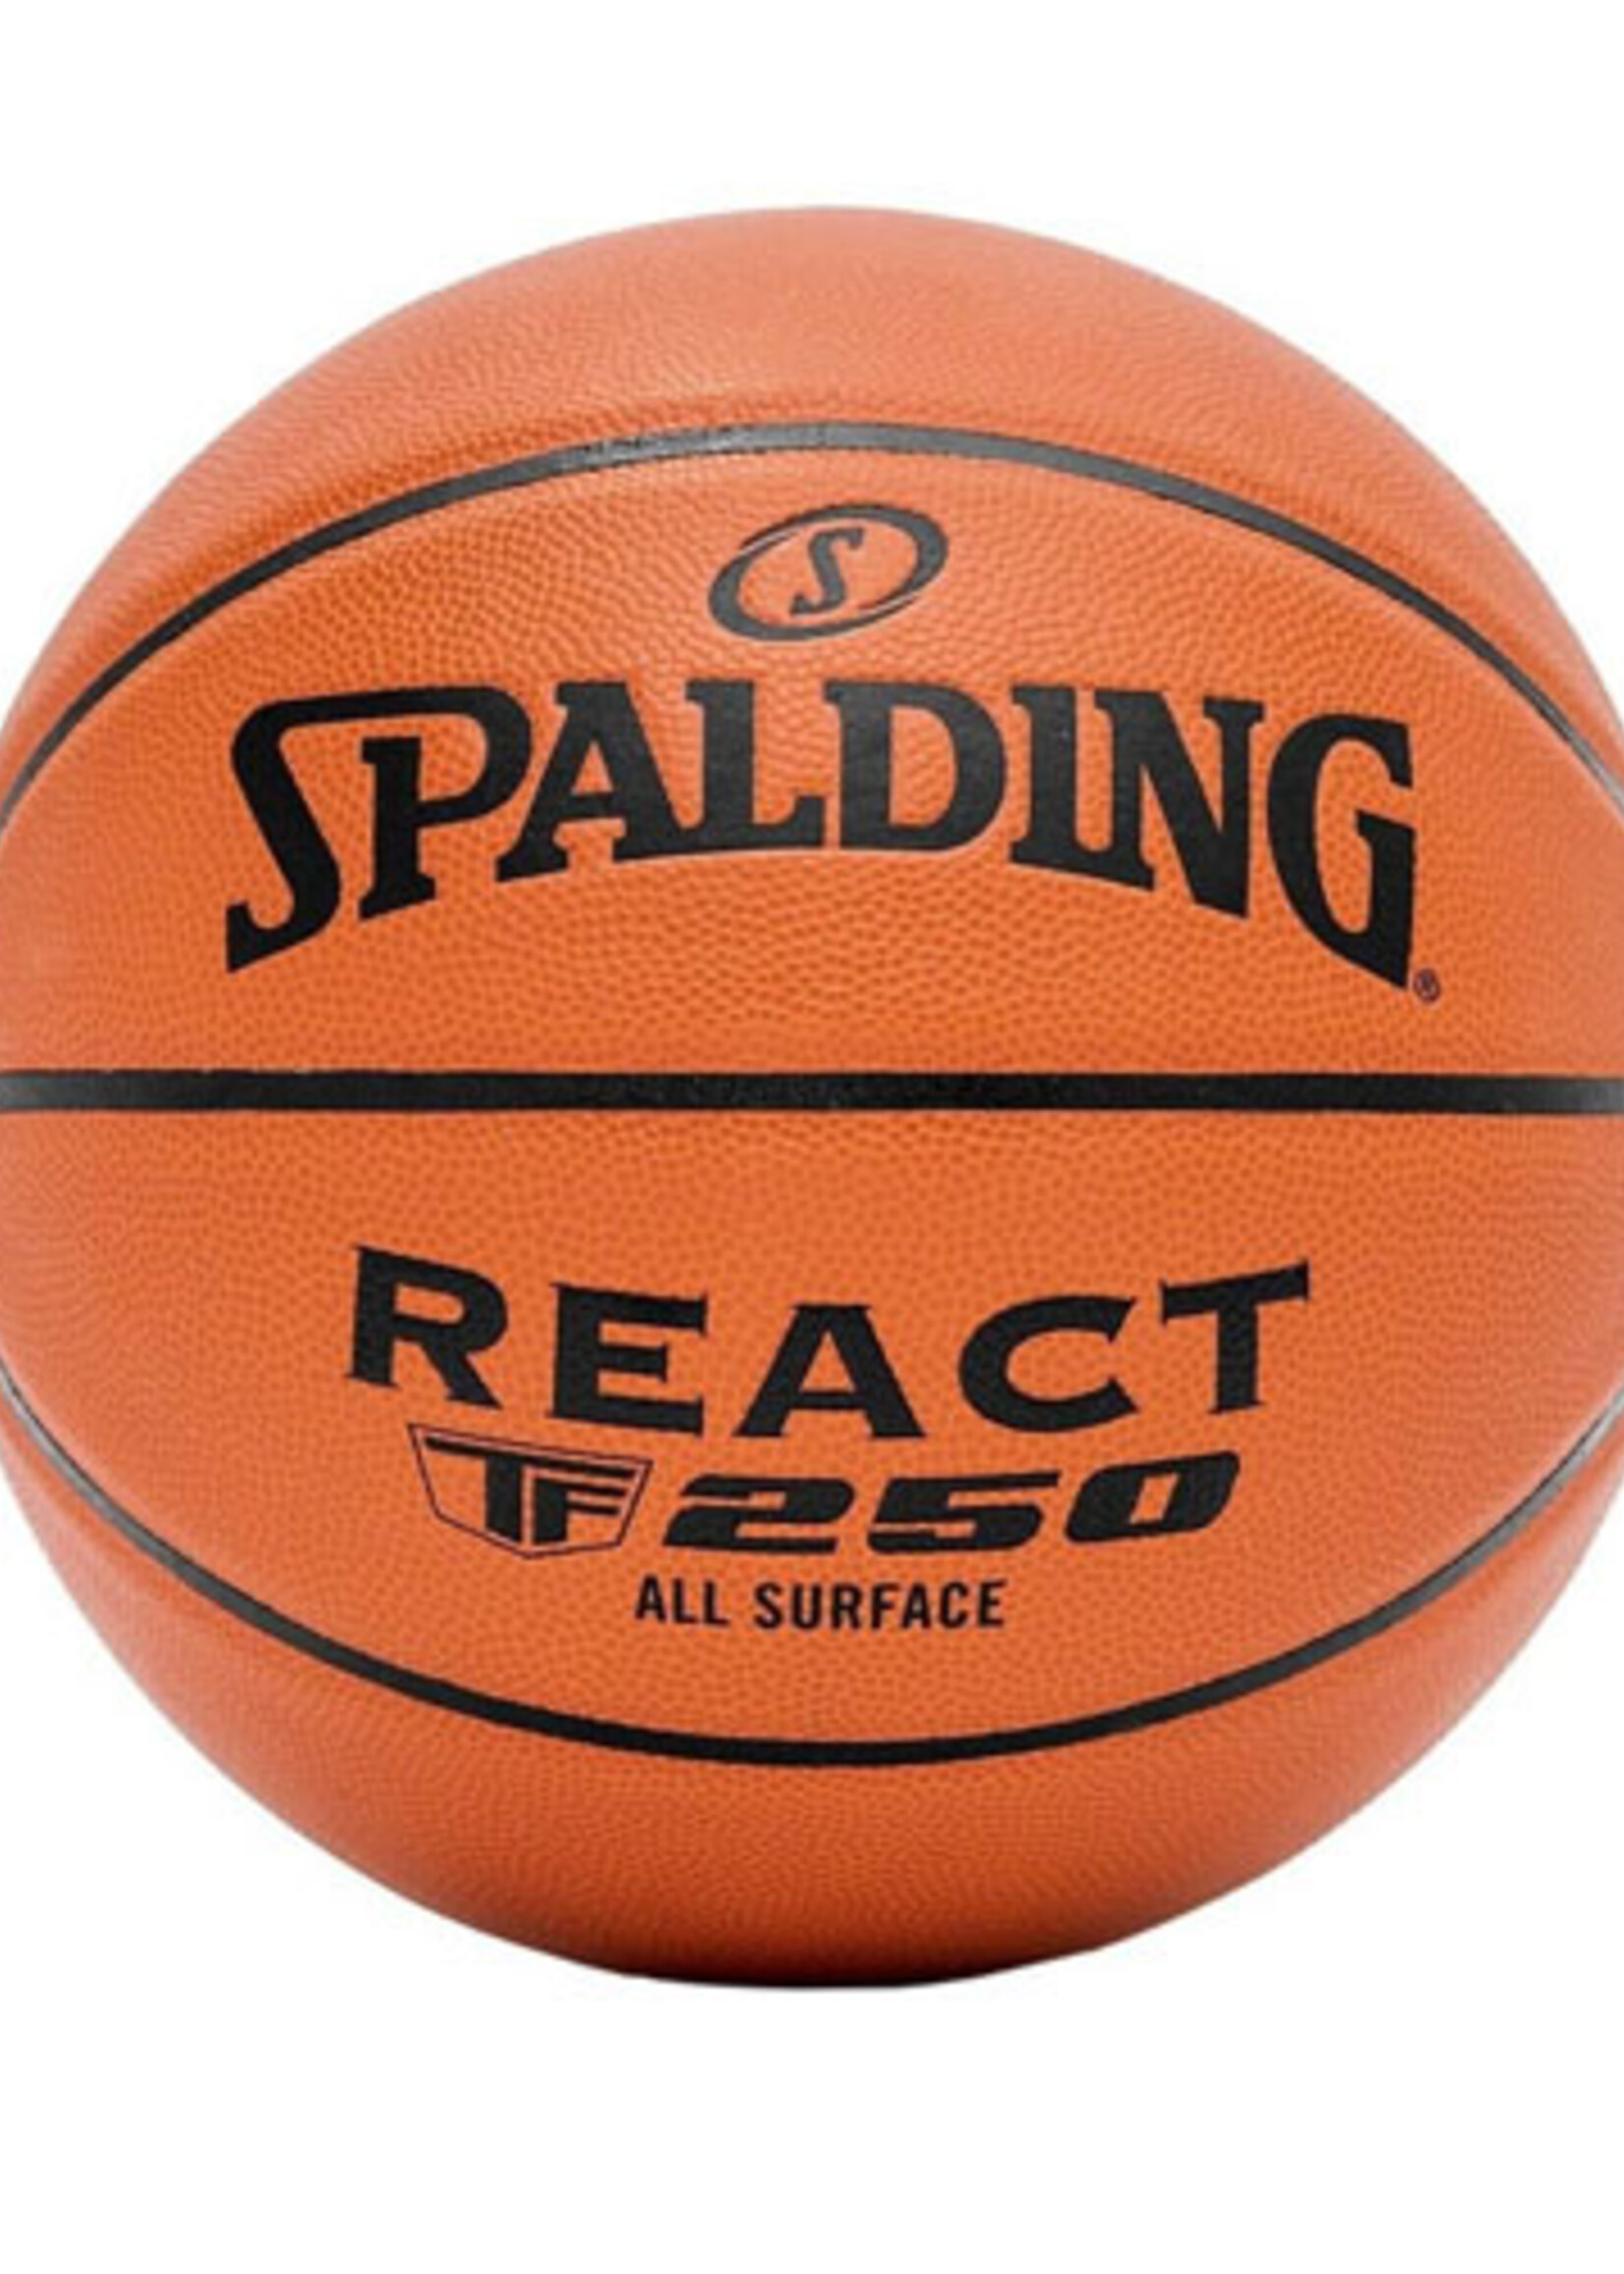 Spalding Spalding React TF-250 All Surface Indoor & Outdoor Basket-ball